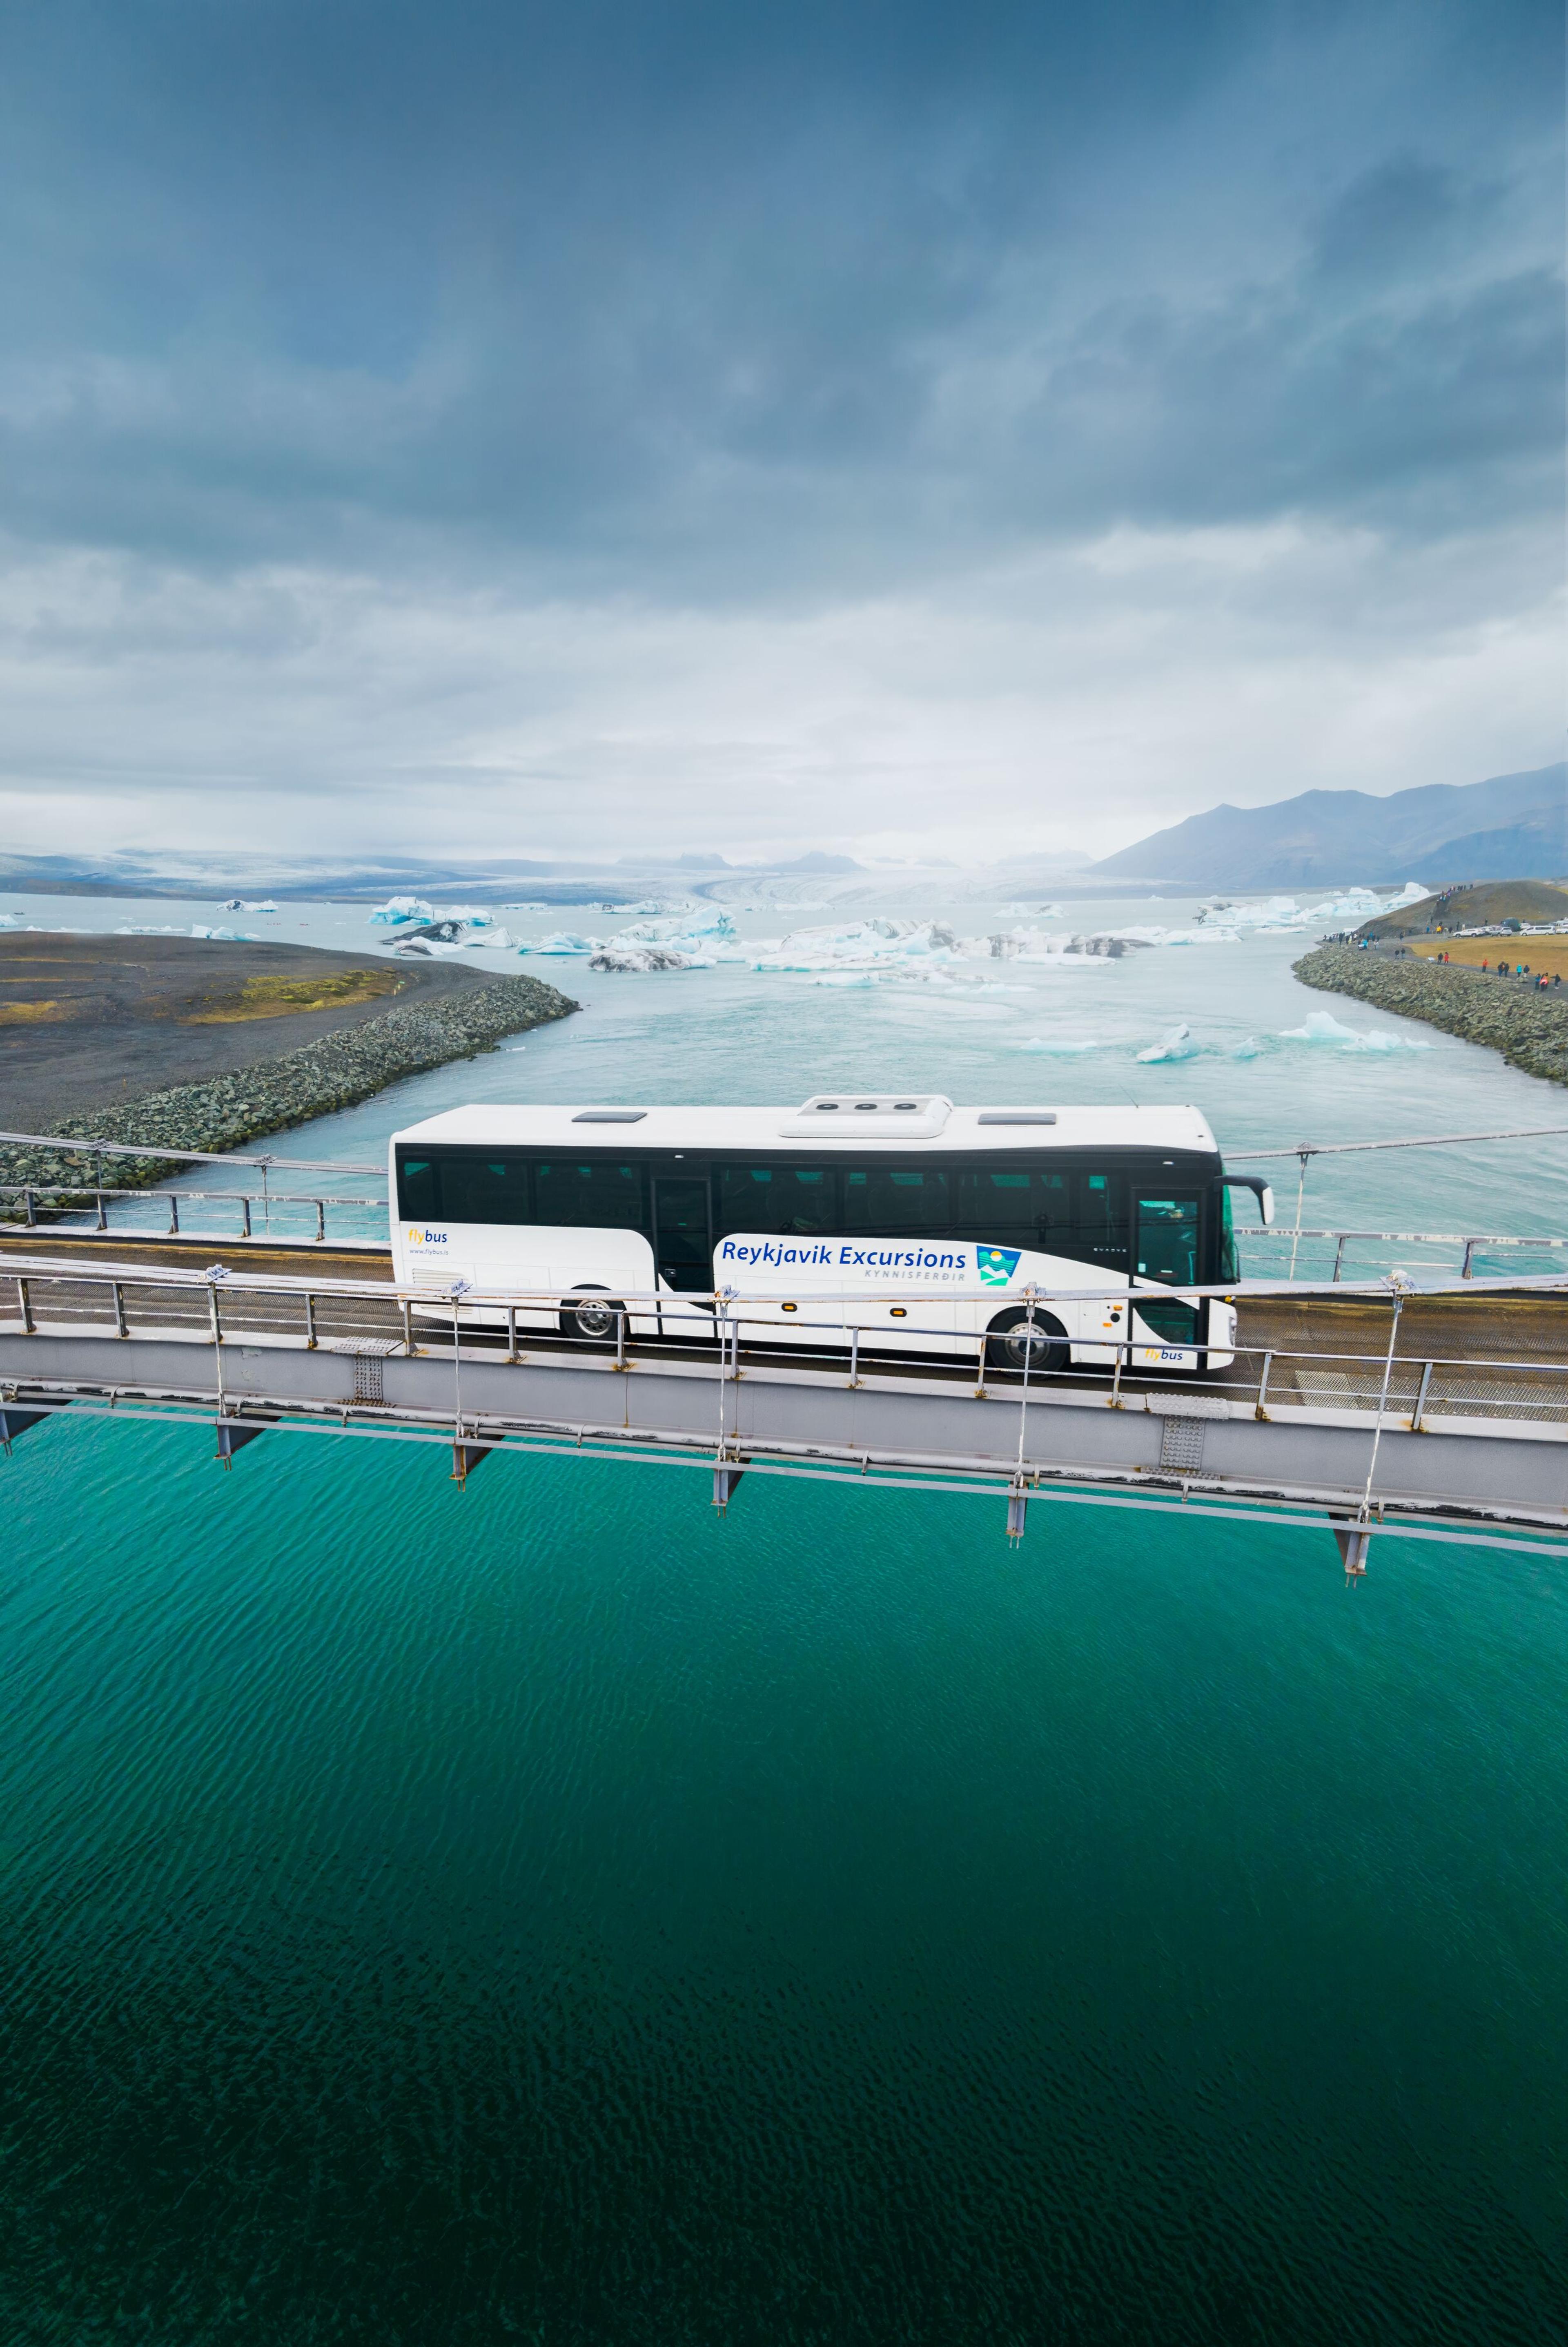 A tour bus crossing a bridge over turquoise waters with a view of a glacier and floating icebergs in the background, under an overcast sky.